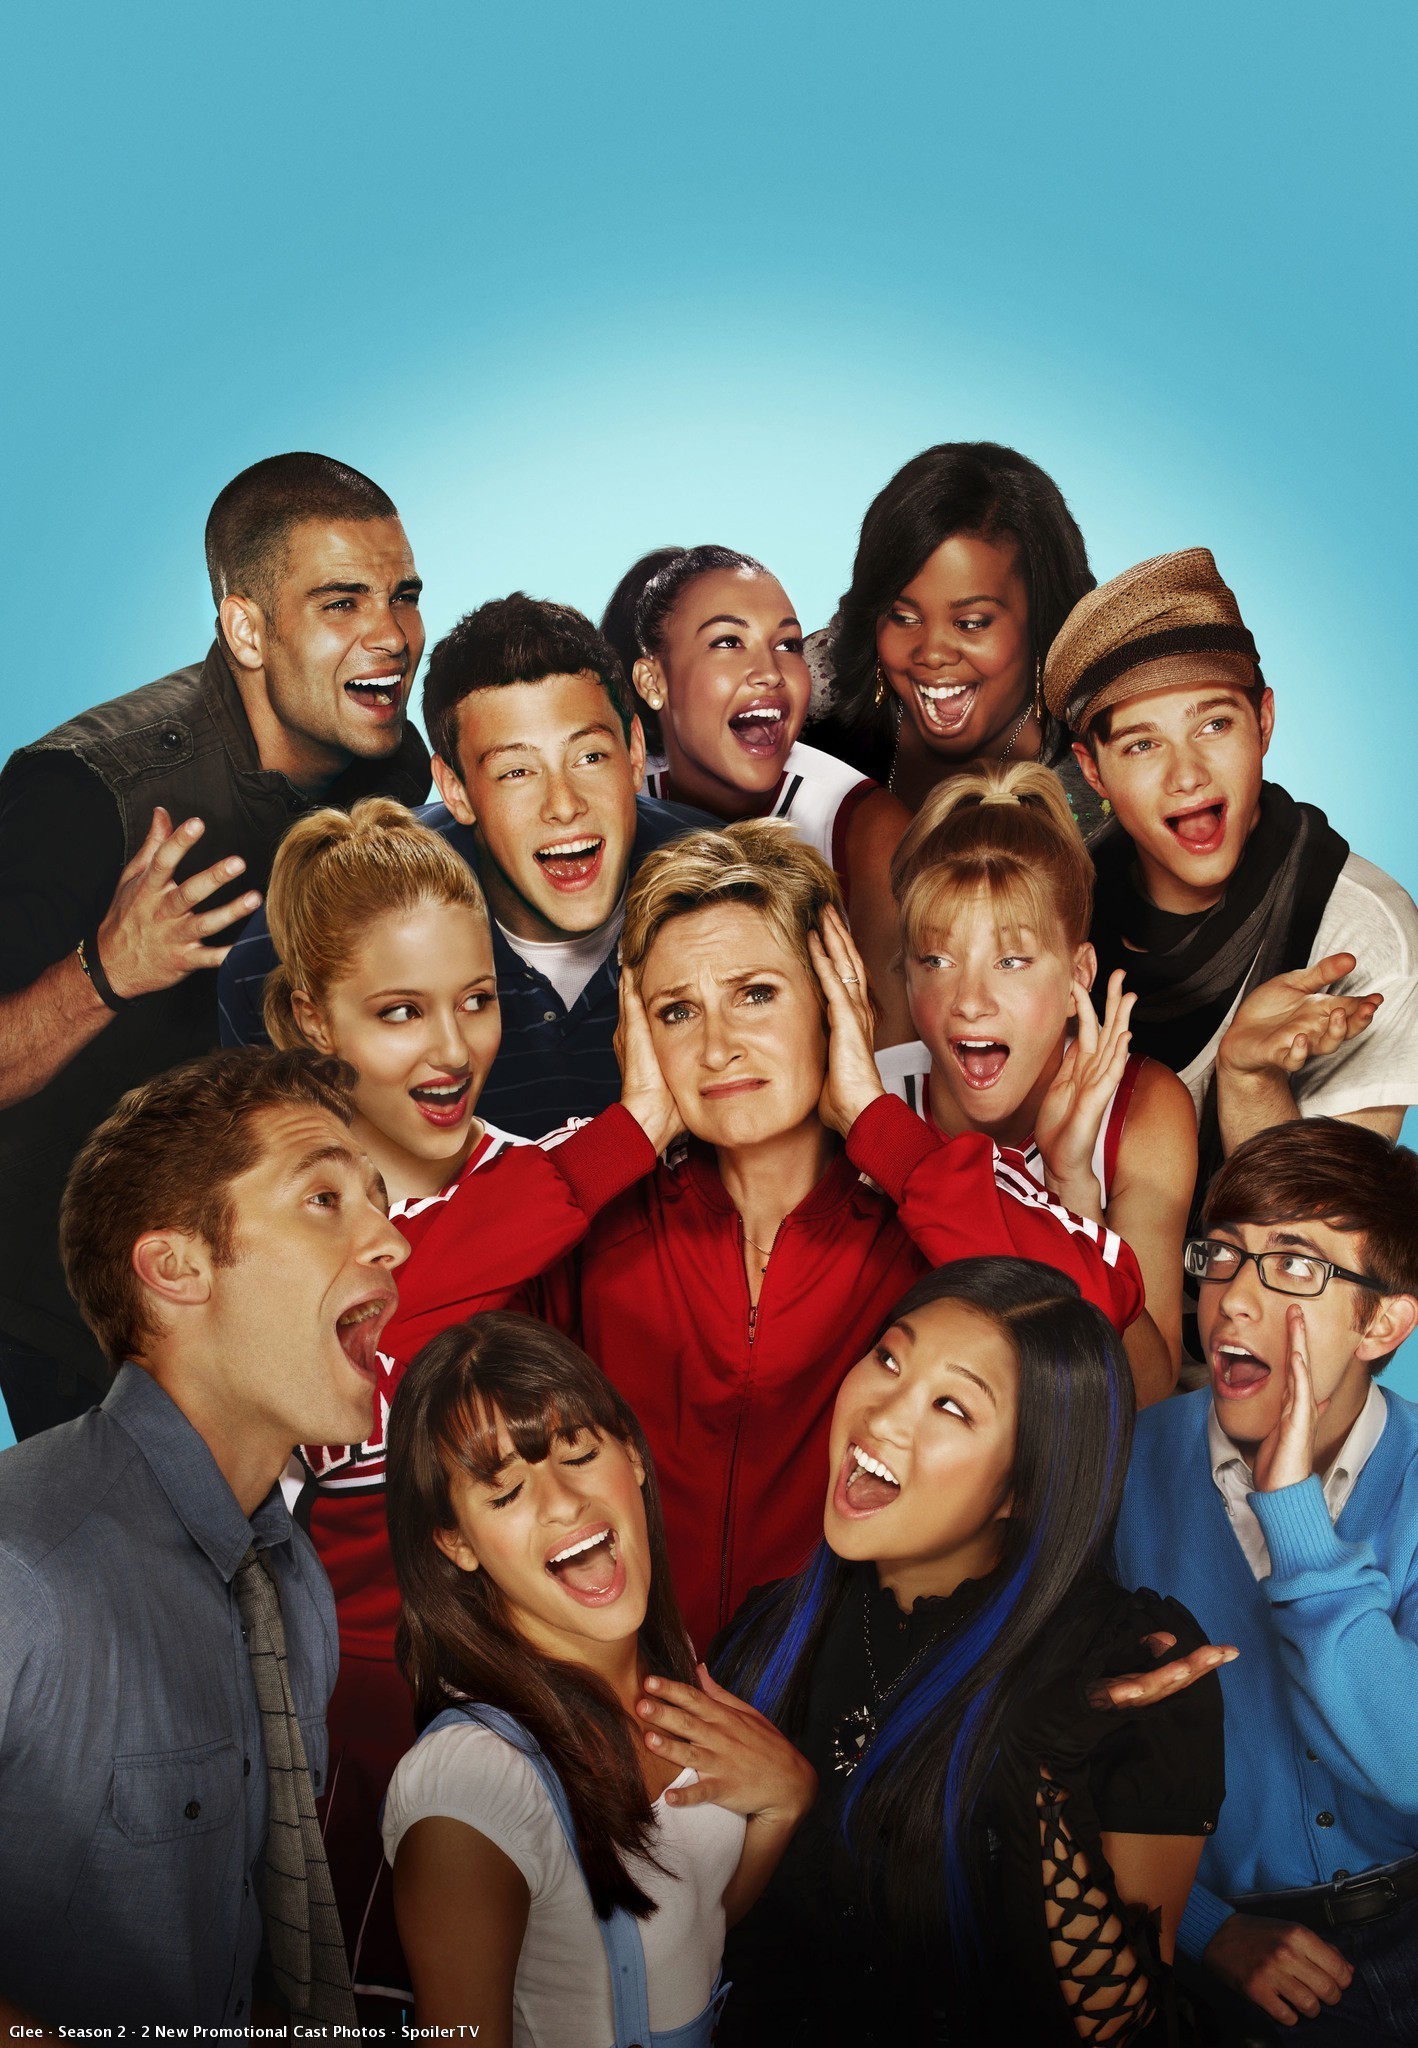 Free Download Glee Wallpaper For Phone 63 Images 1418x48 For Your Desktop Mobile Tablet Explore 57 Glee Wallpaper Glee Wallpaper For Phone Glee Wallpaper For Ipad Glee Cast Wallpaper